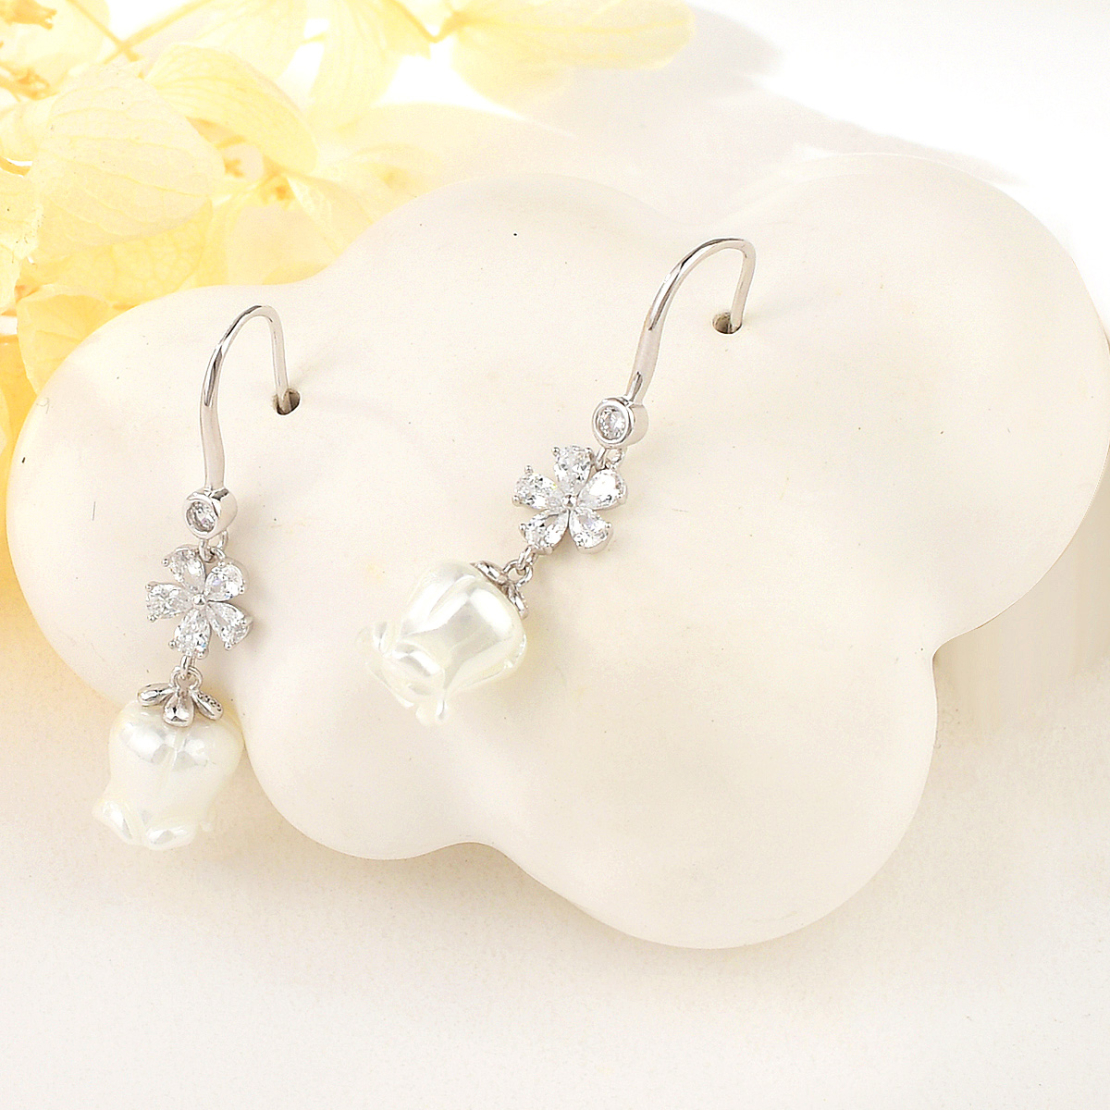 ROSE SILVER EARRINGS WITH PEARLS